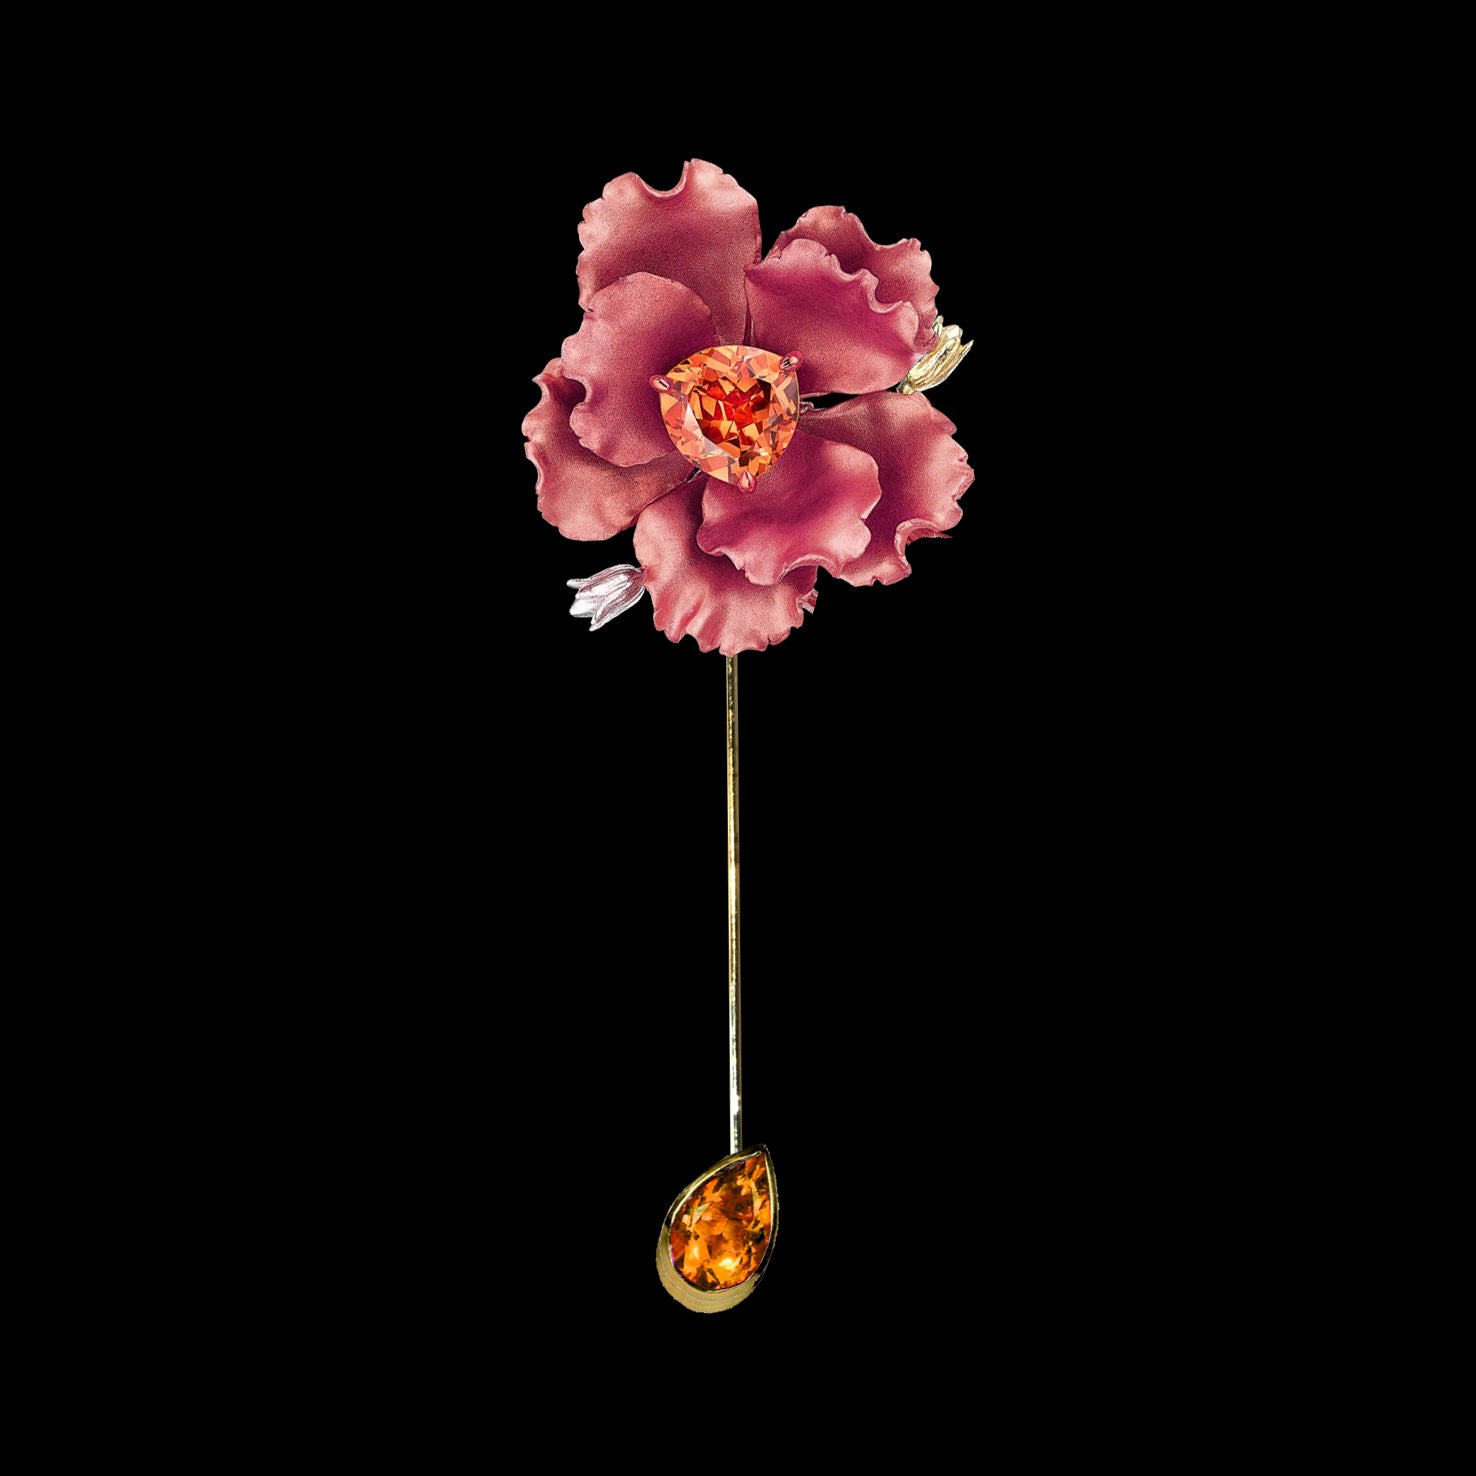 Padparadscha Parrot Bloom Pin, Brooch, Anabela Chan Joaillerie - Fine jewelry with laboratory grown and created gemstones hand-crafted in the United Kingdom. Anabela Chan Joaillerie is the first fine jewellery brand in the world to champion laboratory-grown and created gemstones with high jewellery design, artisanal craftsmanship and a focus on ethical and sustainable innovations.